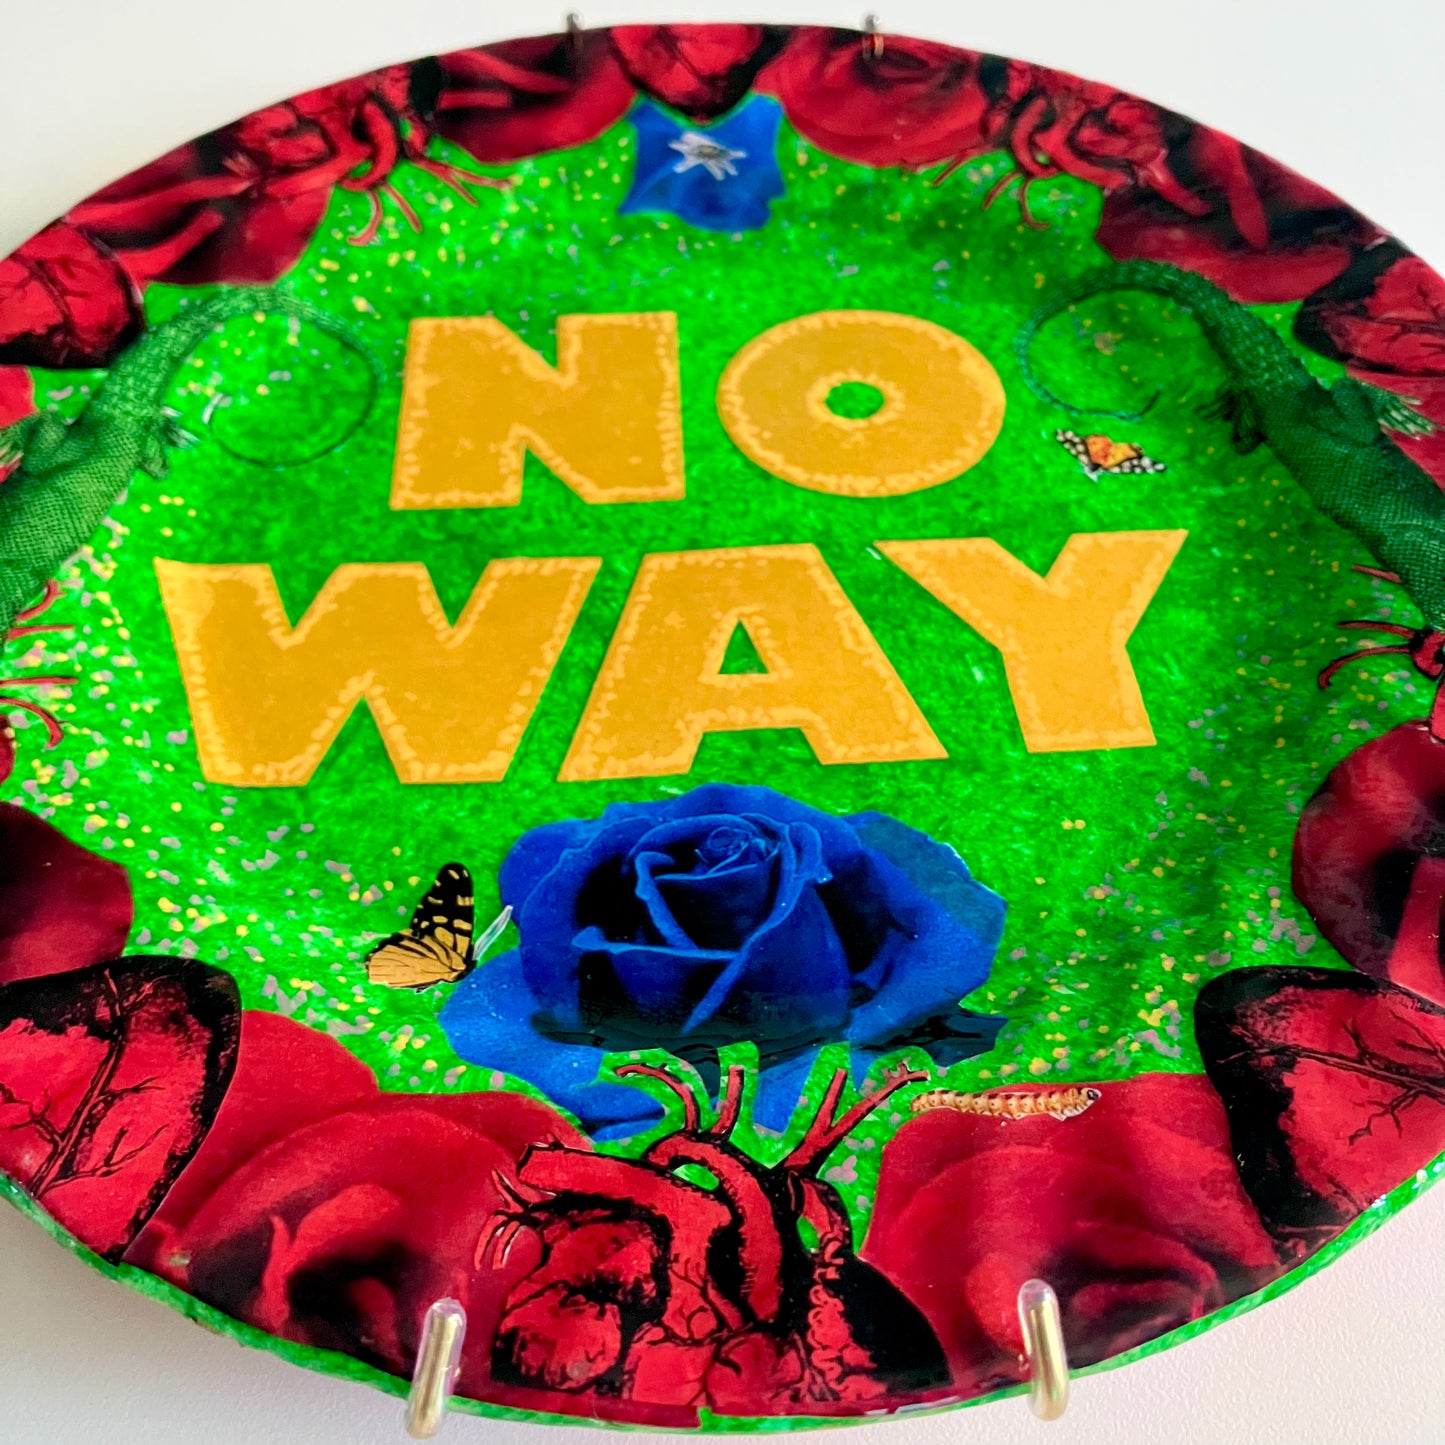 "No Way" one-of-a-kind collage artwork on upcycled wall plate by House of Frisson. Featuring the words "No Way" framed with a collage of roses, and lizards, on a green background. Closeup showing the details of the collage.